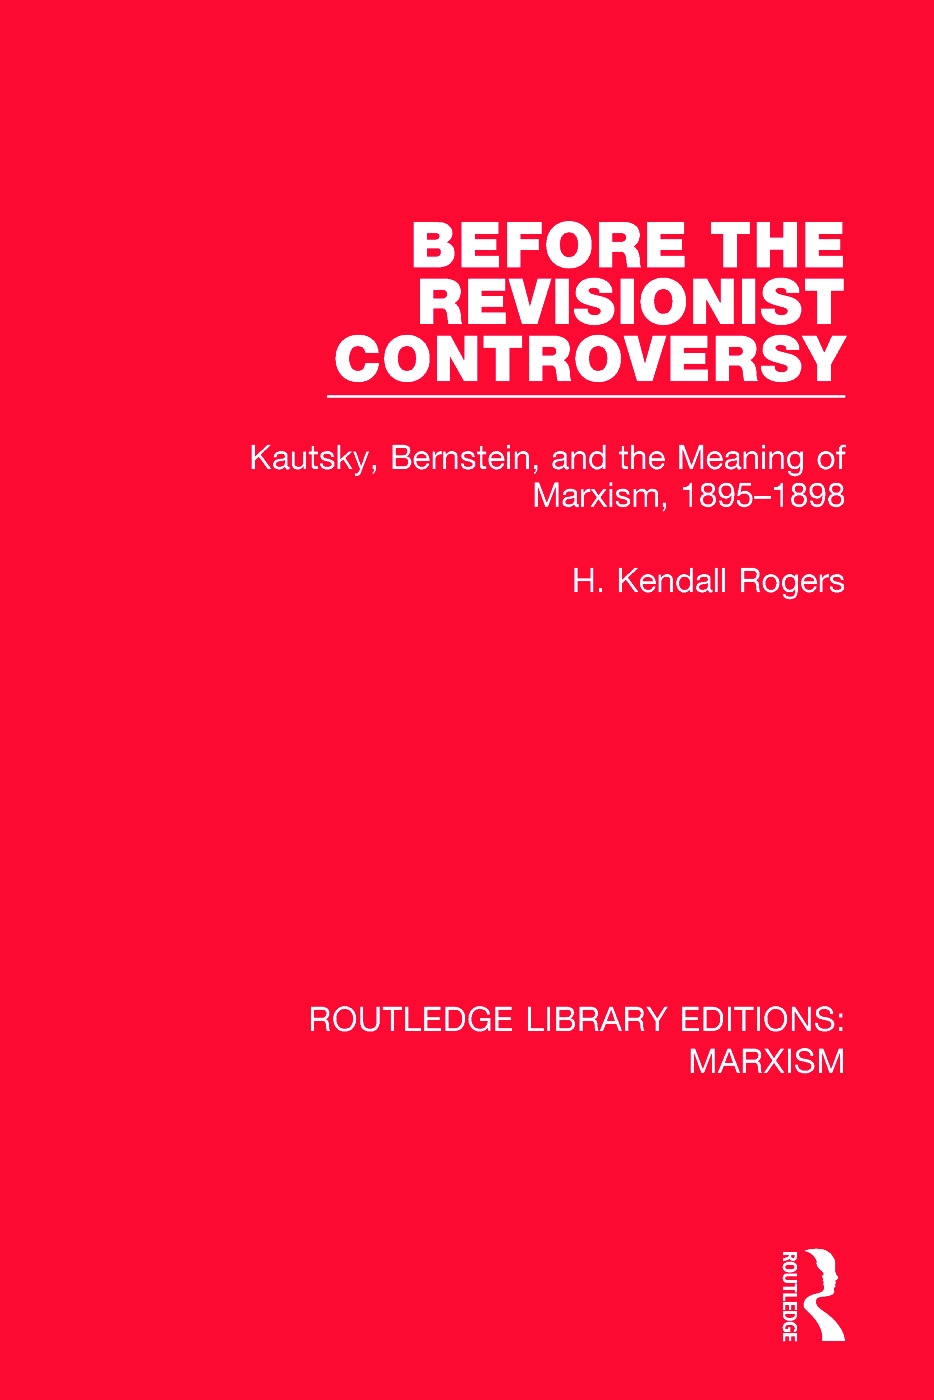 Before the Revisionist Controversy: Kautsky, Bernstein, and the Meaning of Marxism, 1895-1898